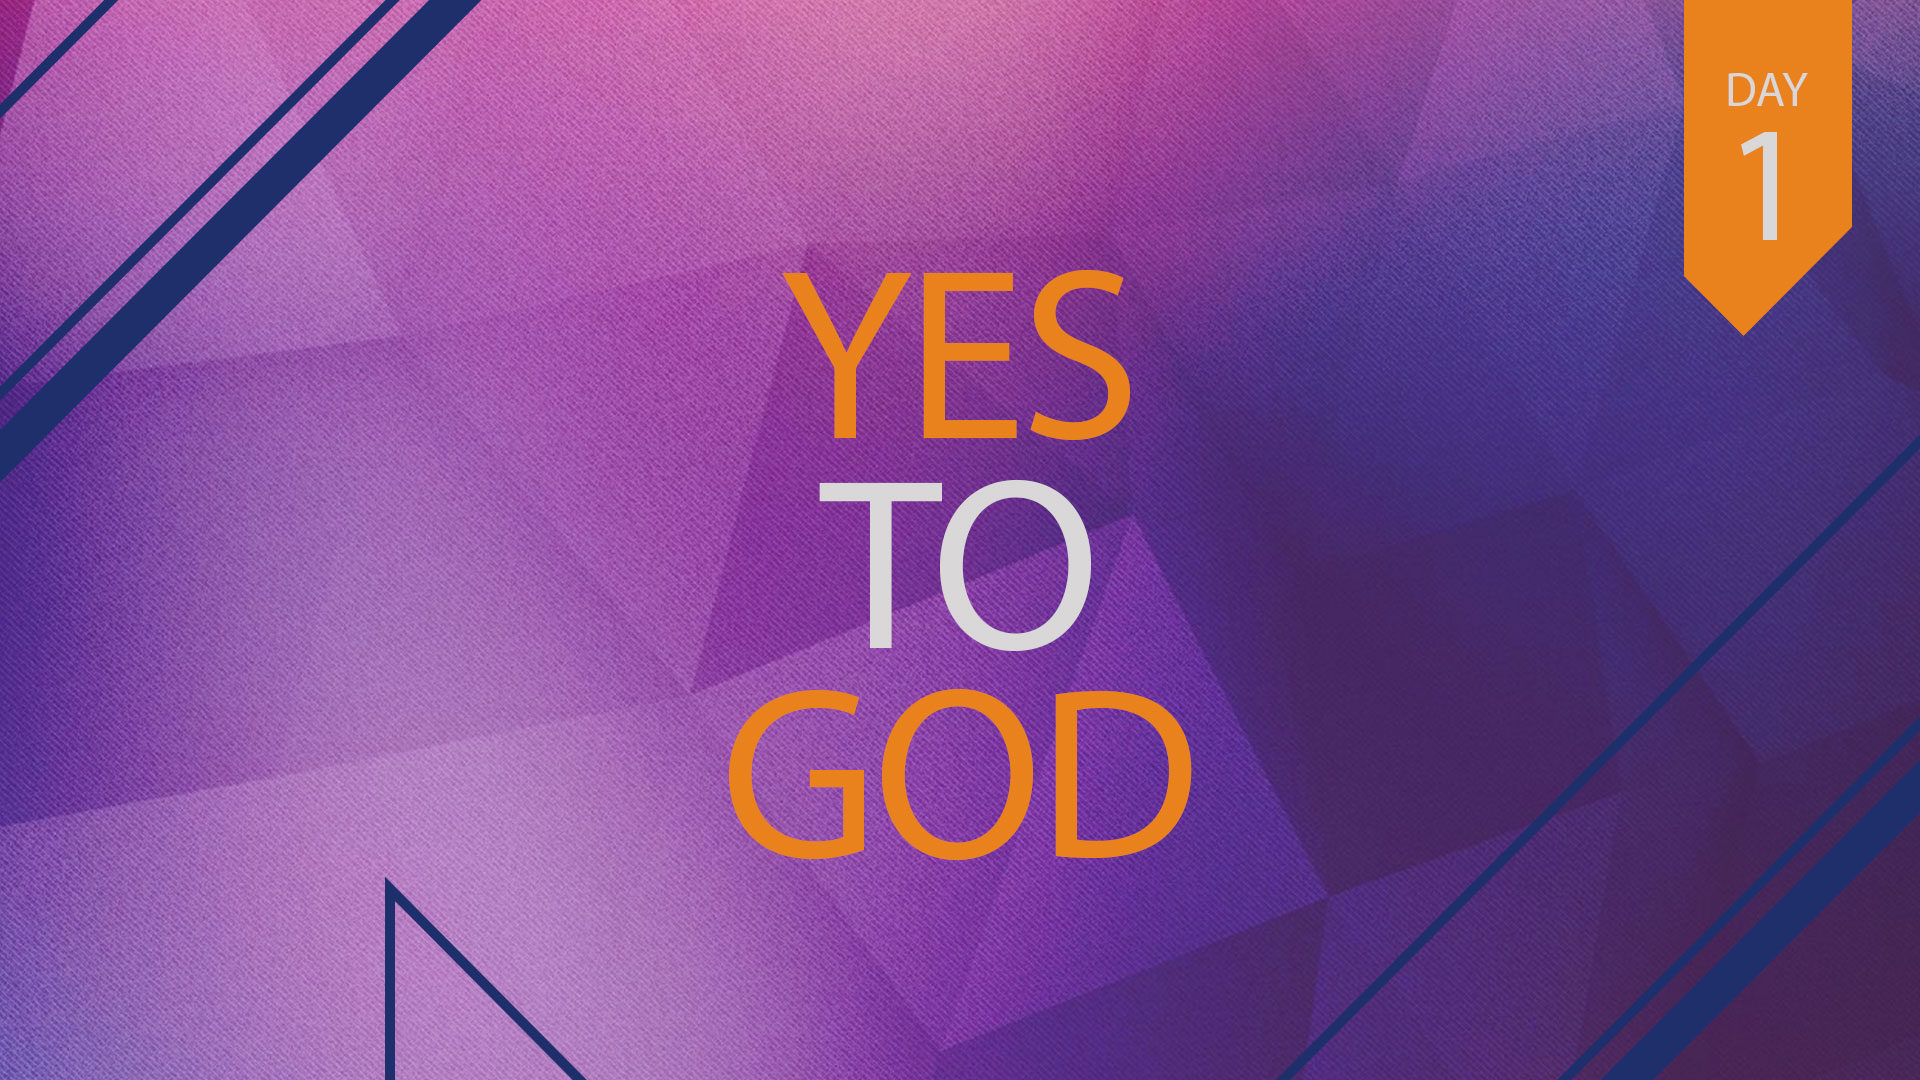 Yes to God!